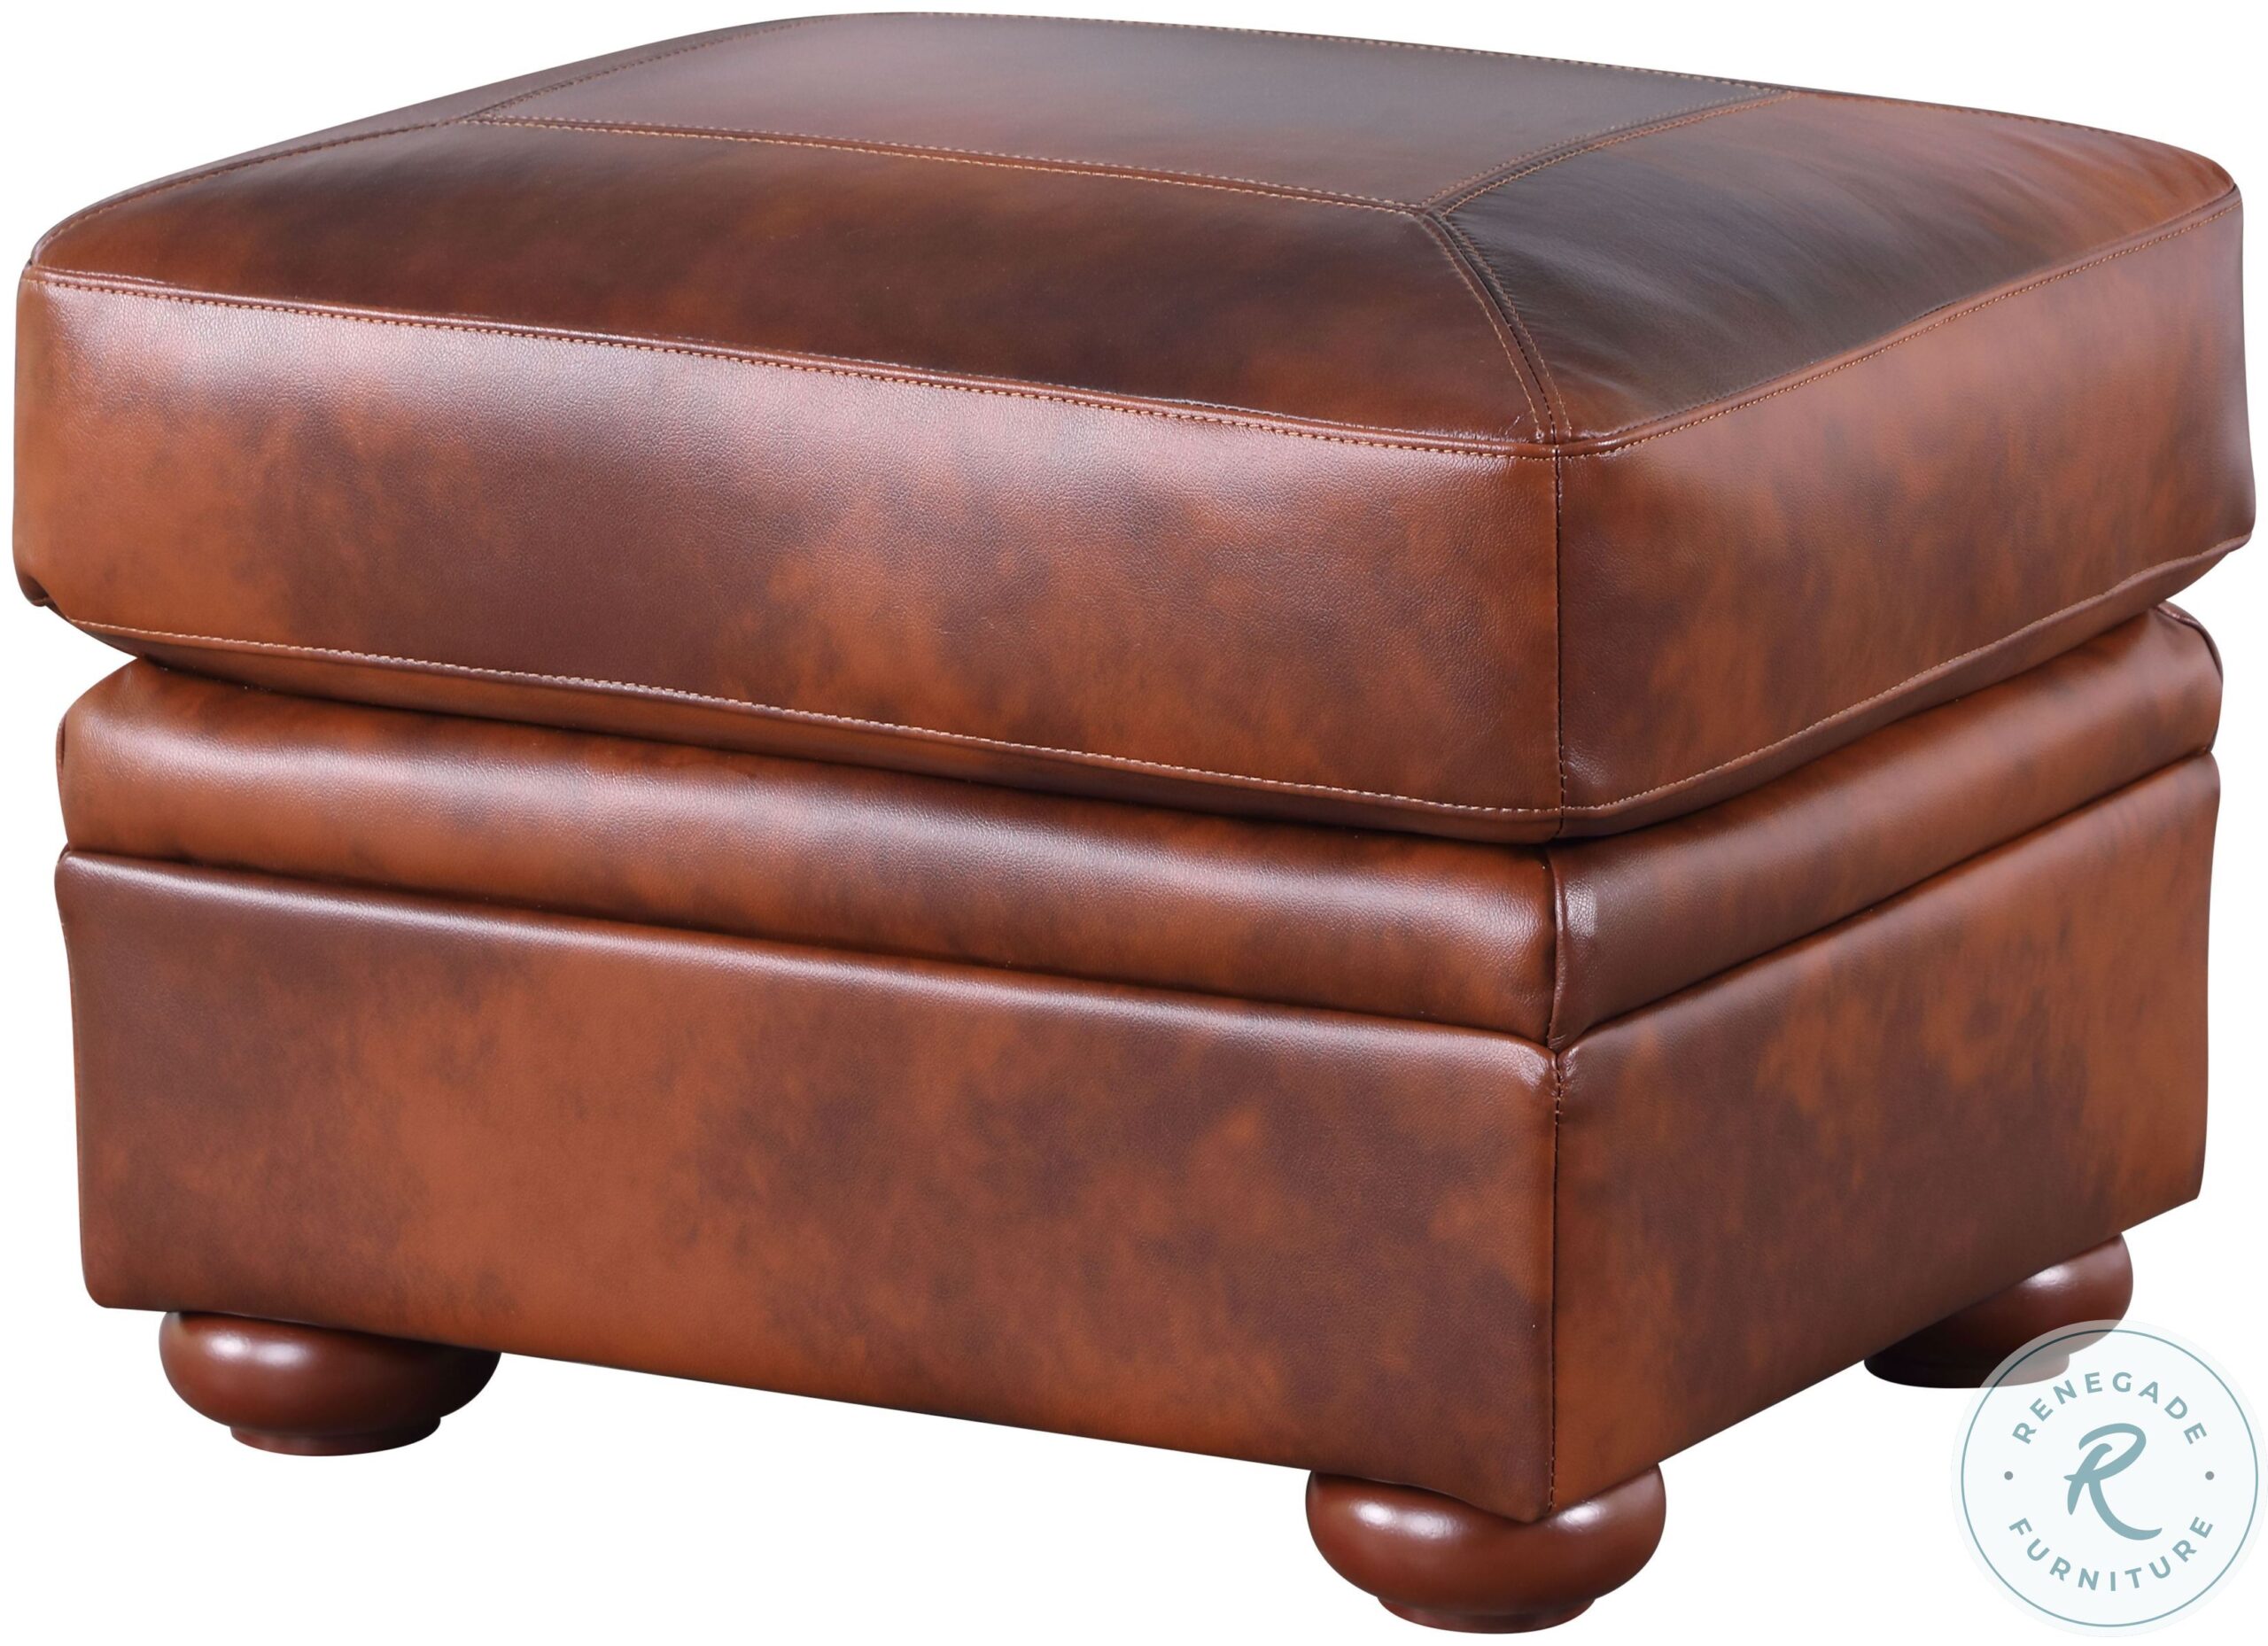 Luxurious Arizona Leather Ottoman with Handcrafted Nailhead Trim